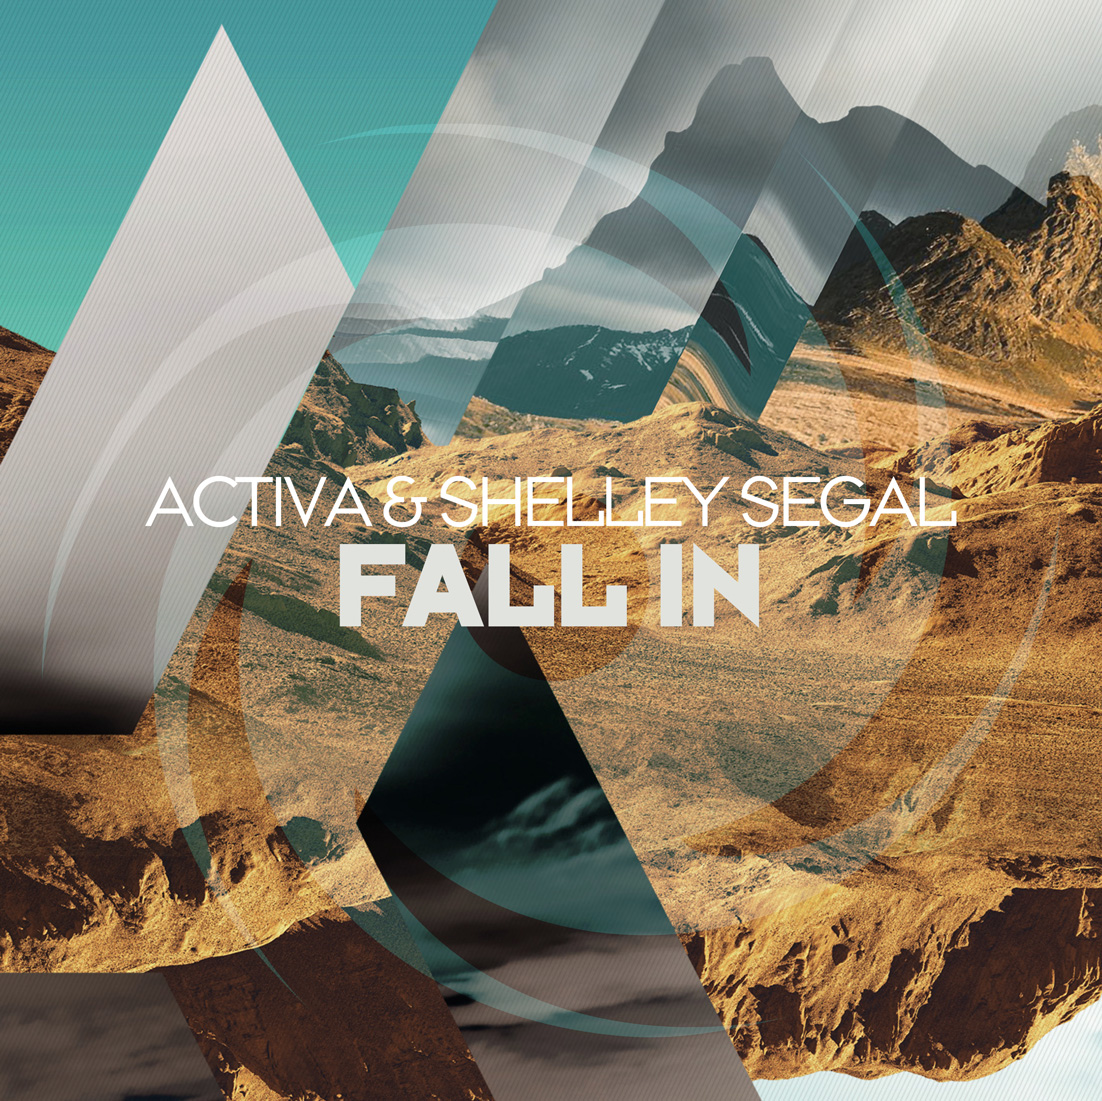 Activa and Shelley Segal presents Fall In on Black Hole Recordings